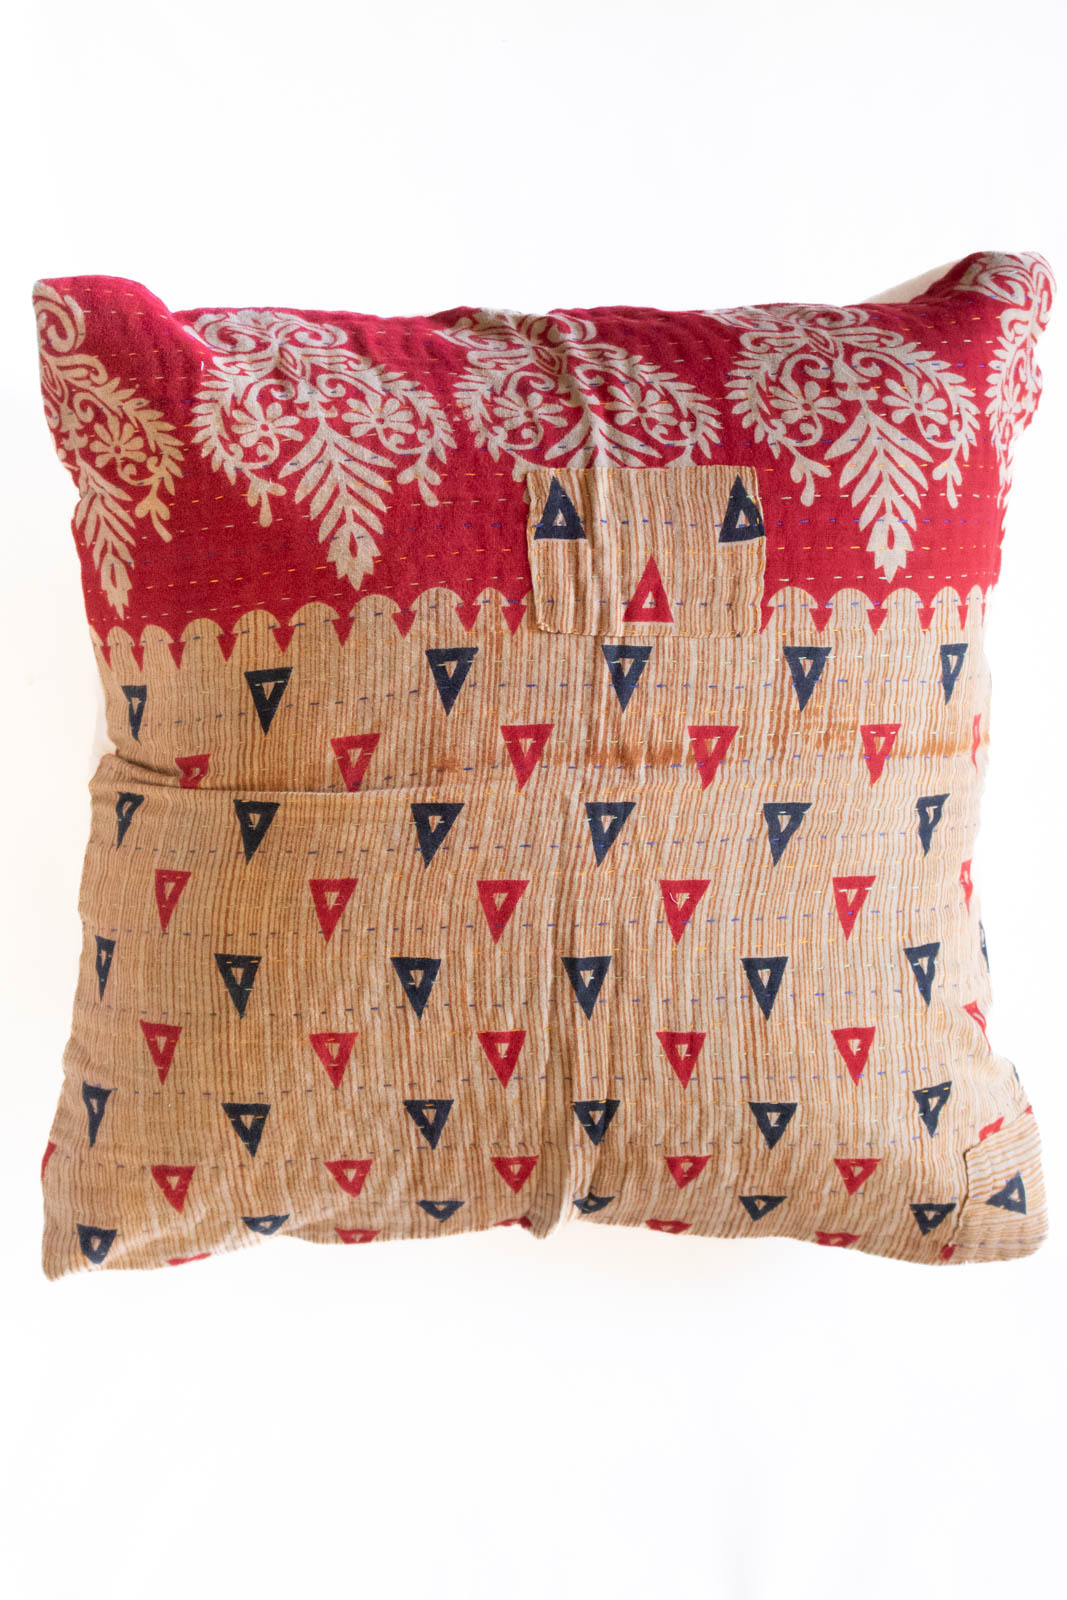 Restore no. 3 Kantha Pillow Cover